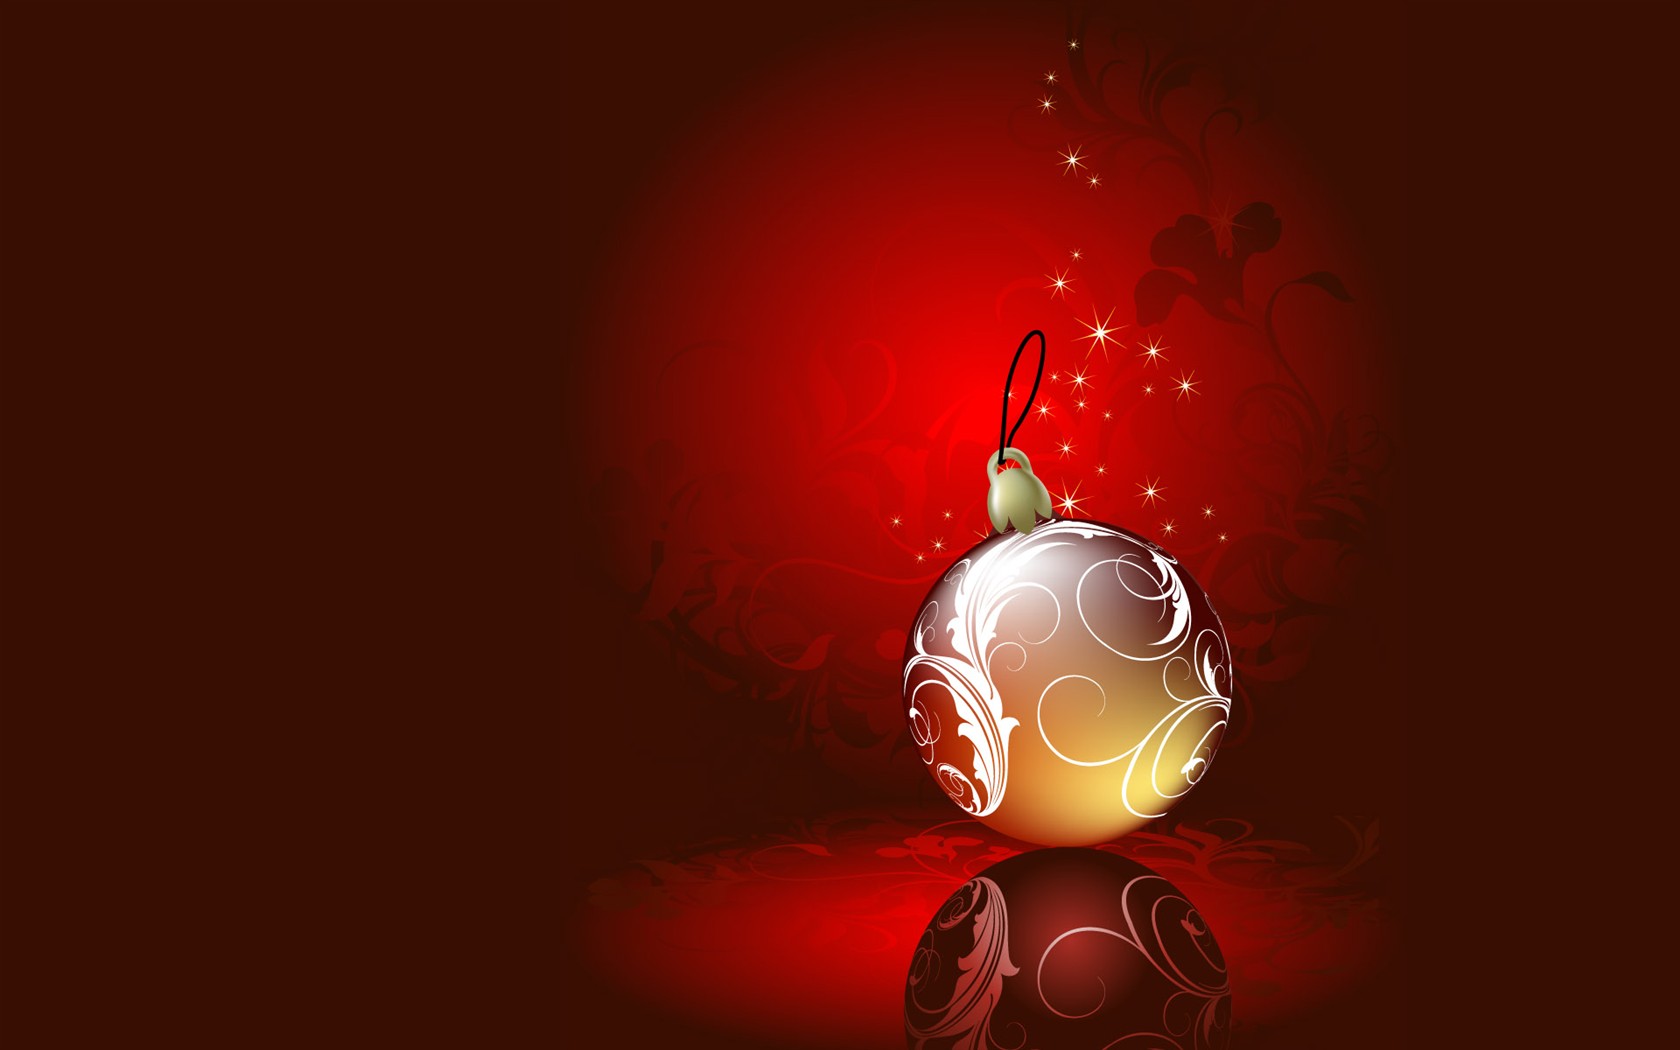 Exquisite Christmas Theme HD Wallpapers #28 - 1680x1050